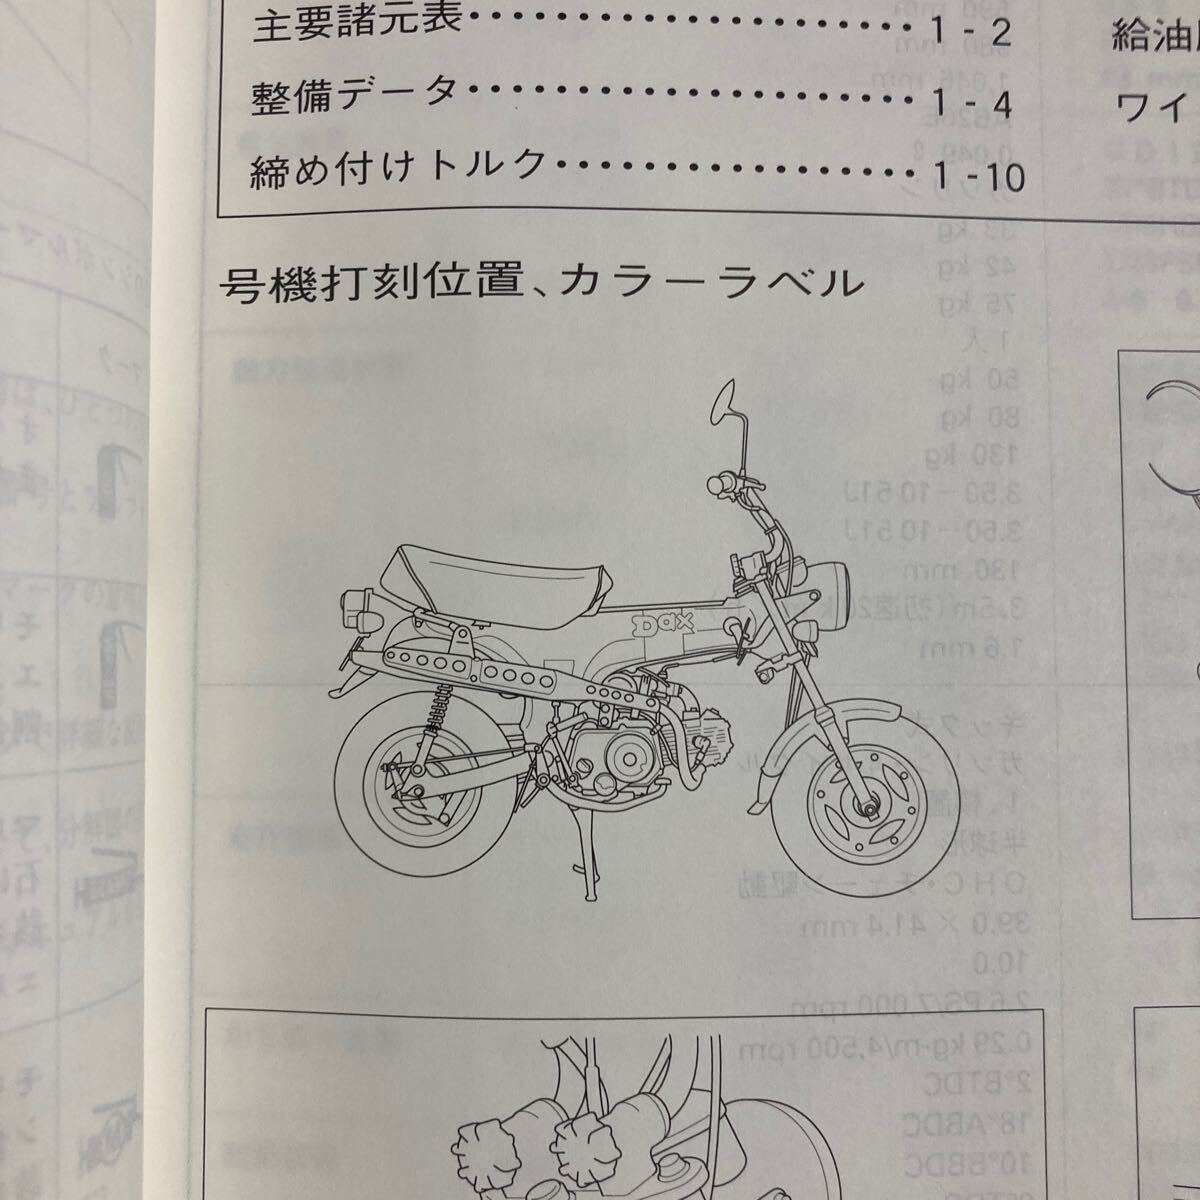  Dux service manual AB26 DAX 50 Heisei era. Dux used becomes.. use . problem no think.